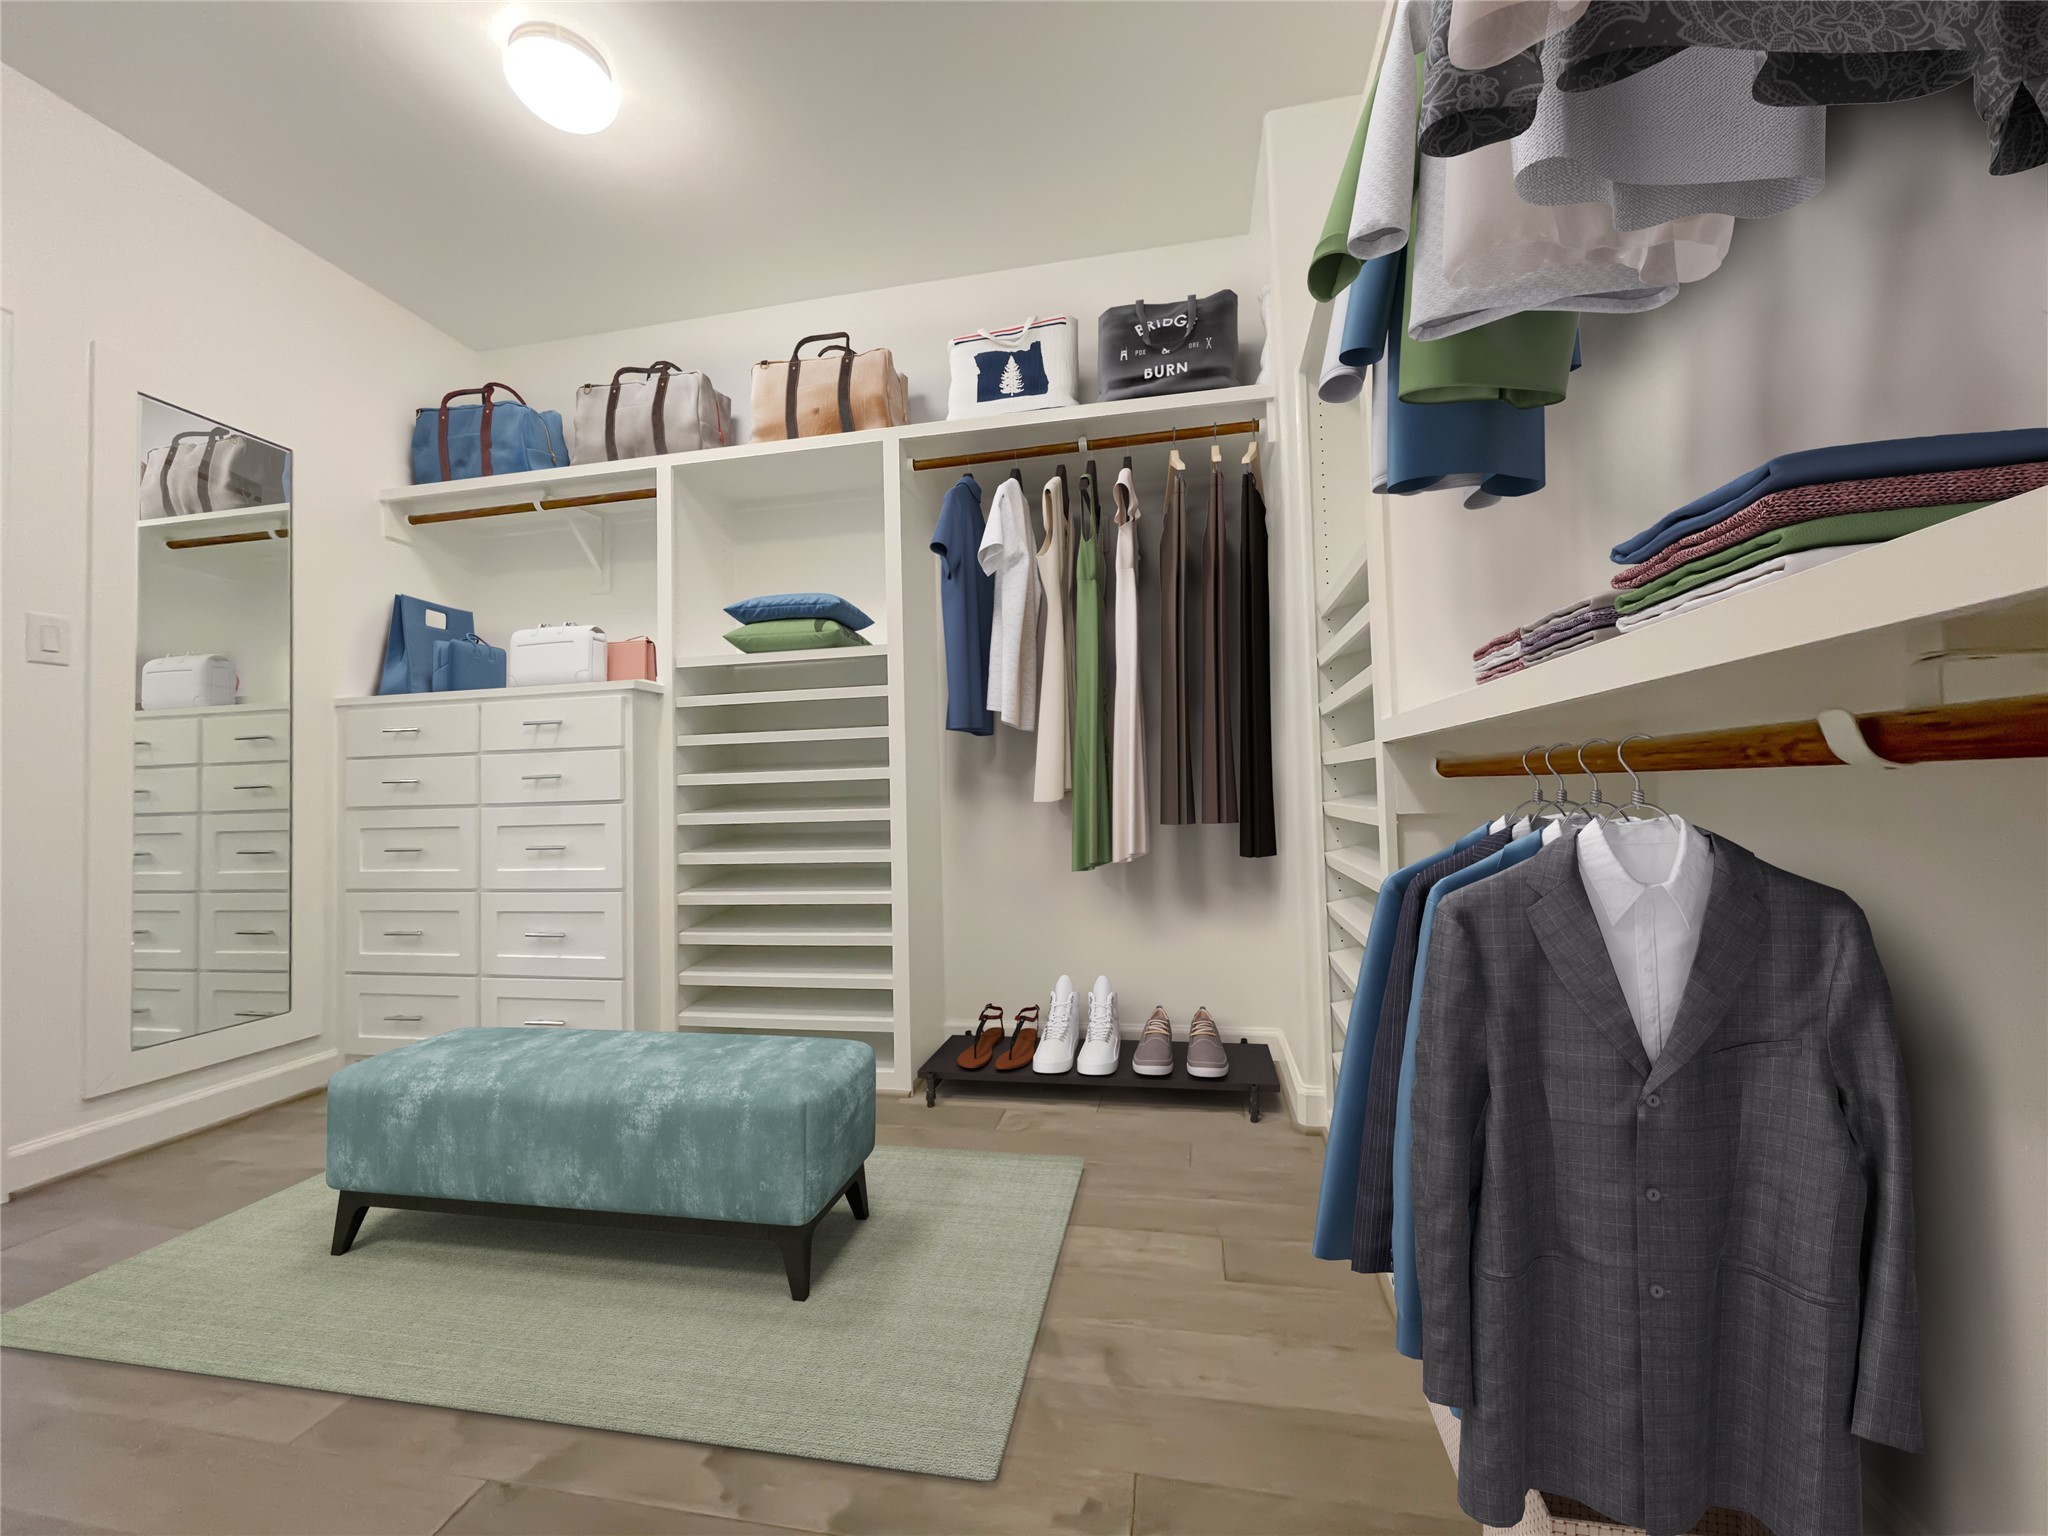 Primary Bedroom Closet
*Image depicts similar product at another ROC Homes community